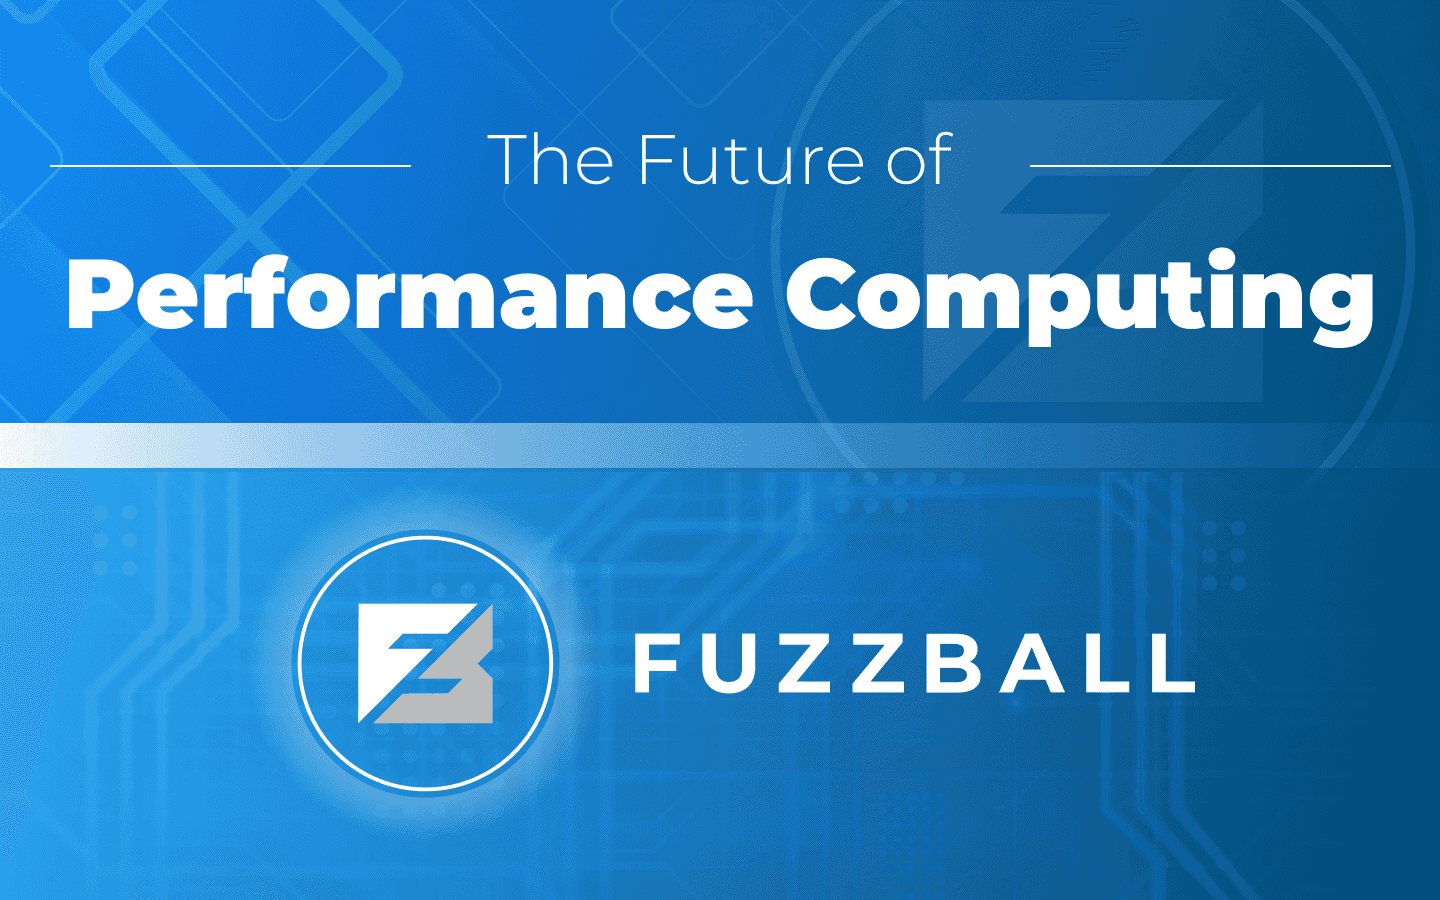 Fuzzball: The future of performance computing is here